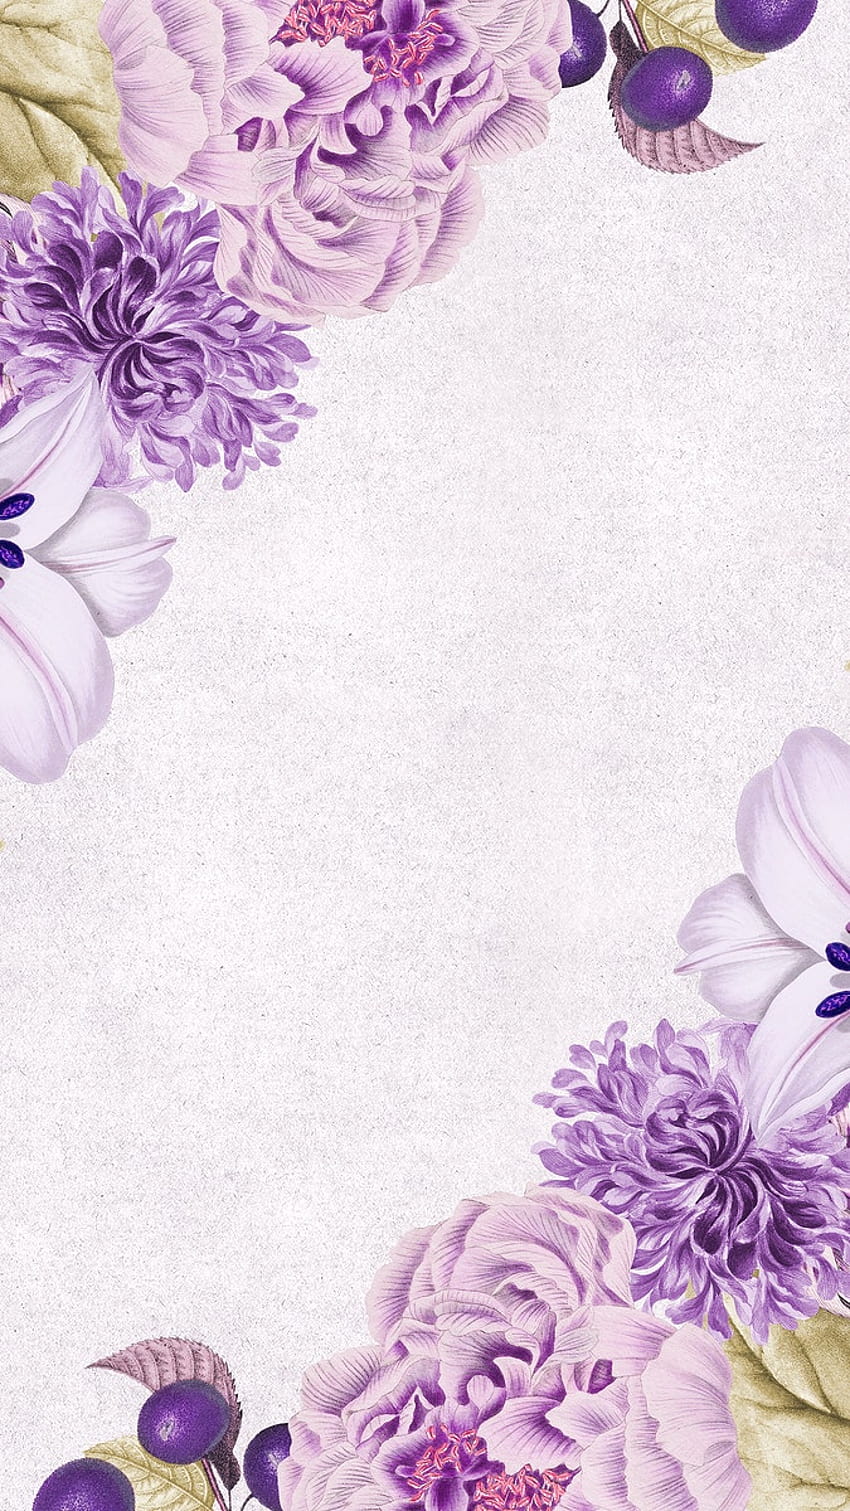 Vintage purple floral frame design, purple and white flowered HD phone wallpaper